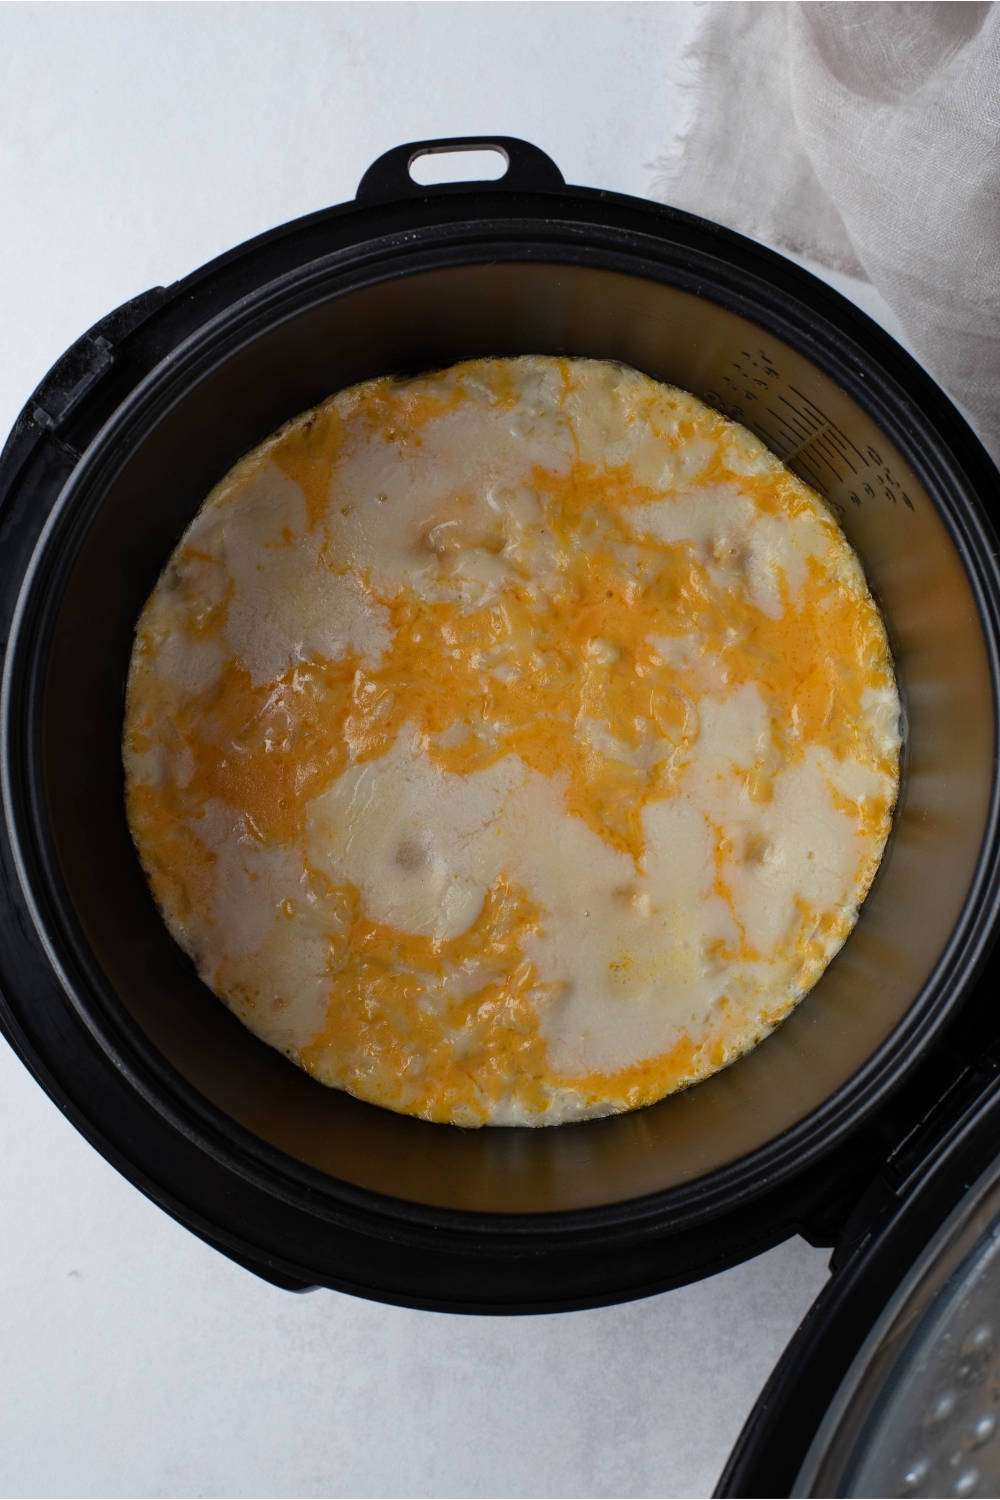 Crockpot filled with a mixture of creamy soup and melted cheese.